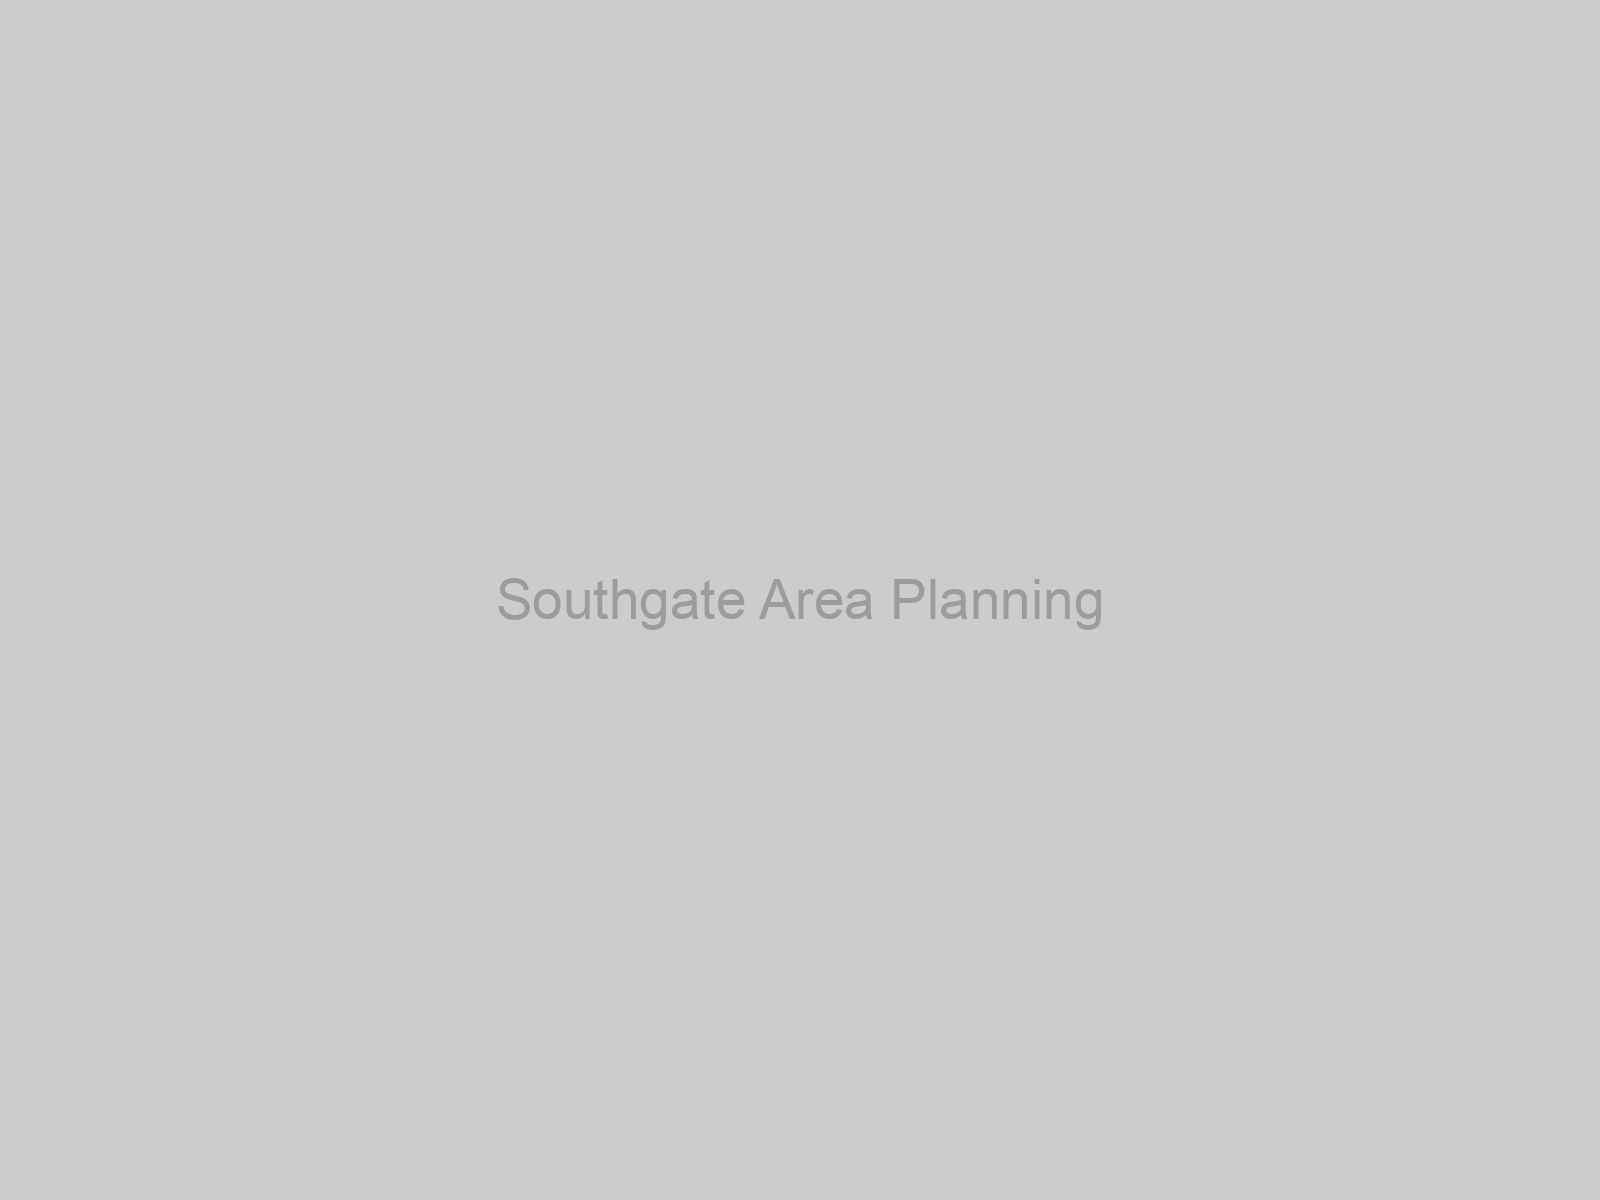 Southgate Area Planning